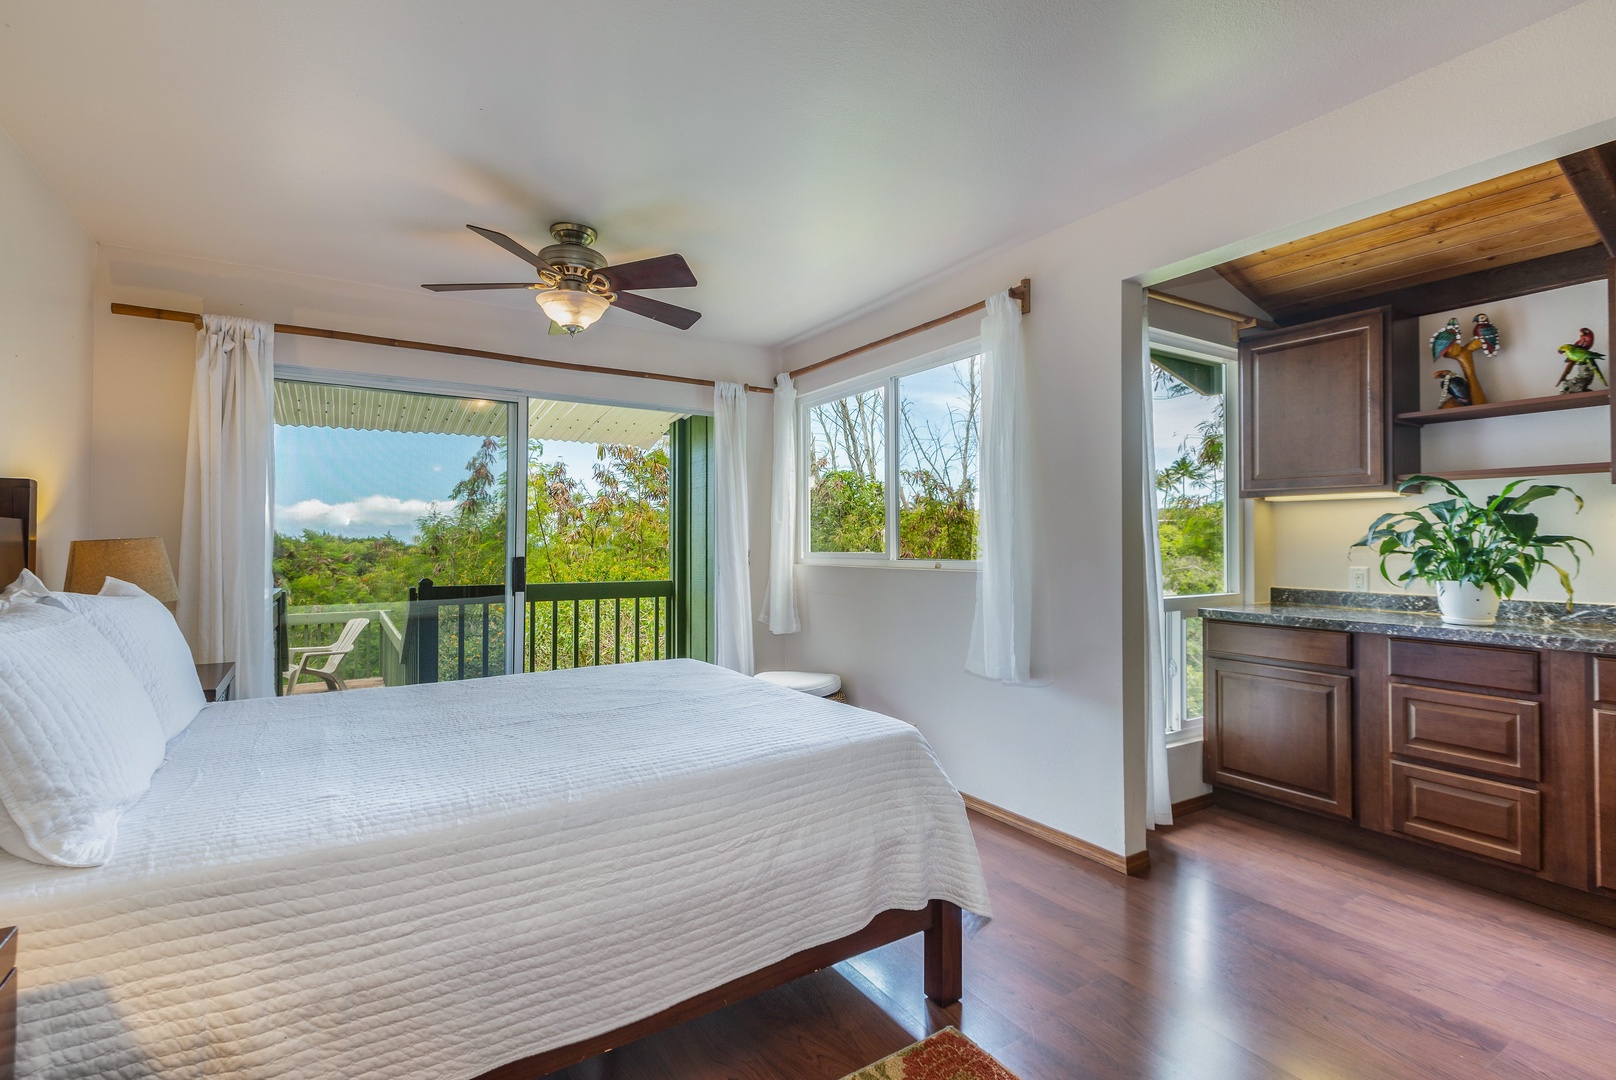 Princeville Vacation Rentals, Hale Ohia - This bedroom has a queen bed, ceiling fan, and ensuite bath